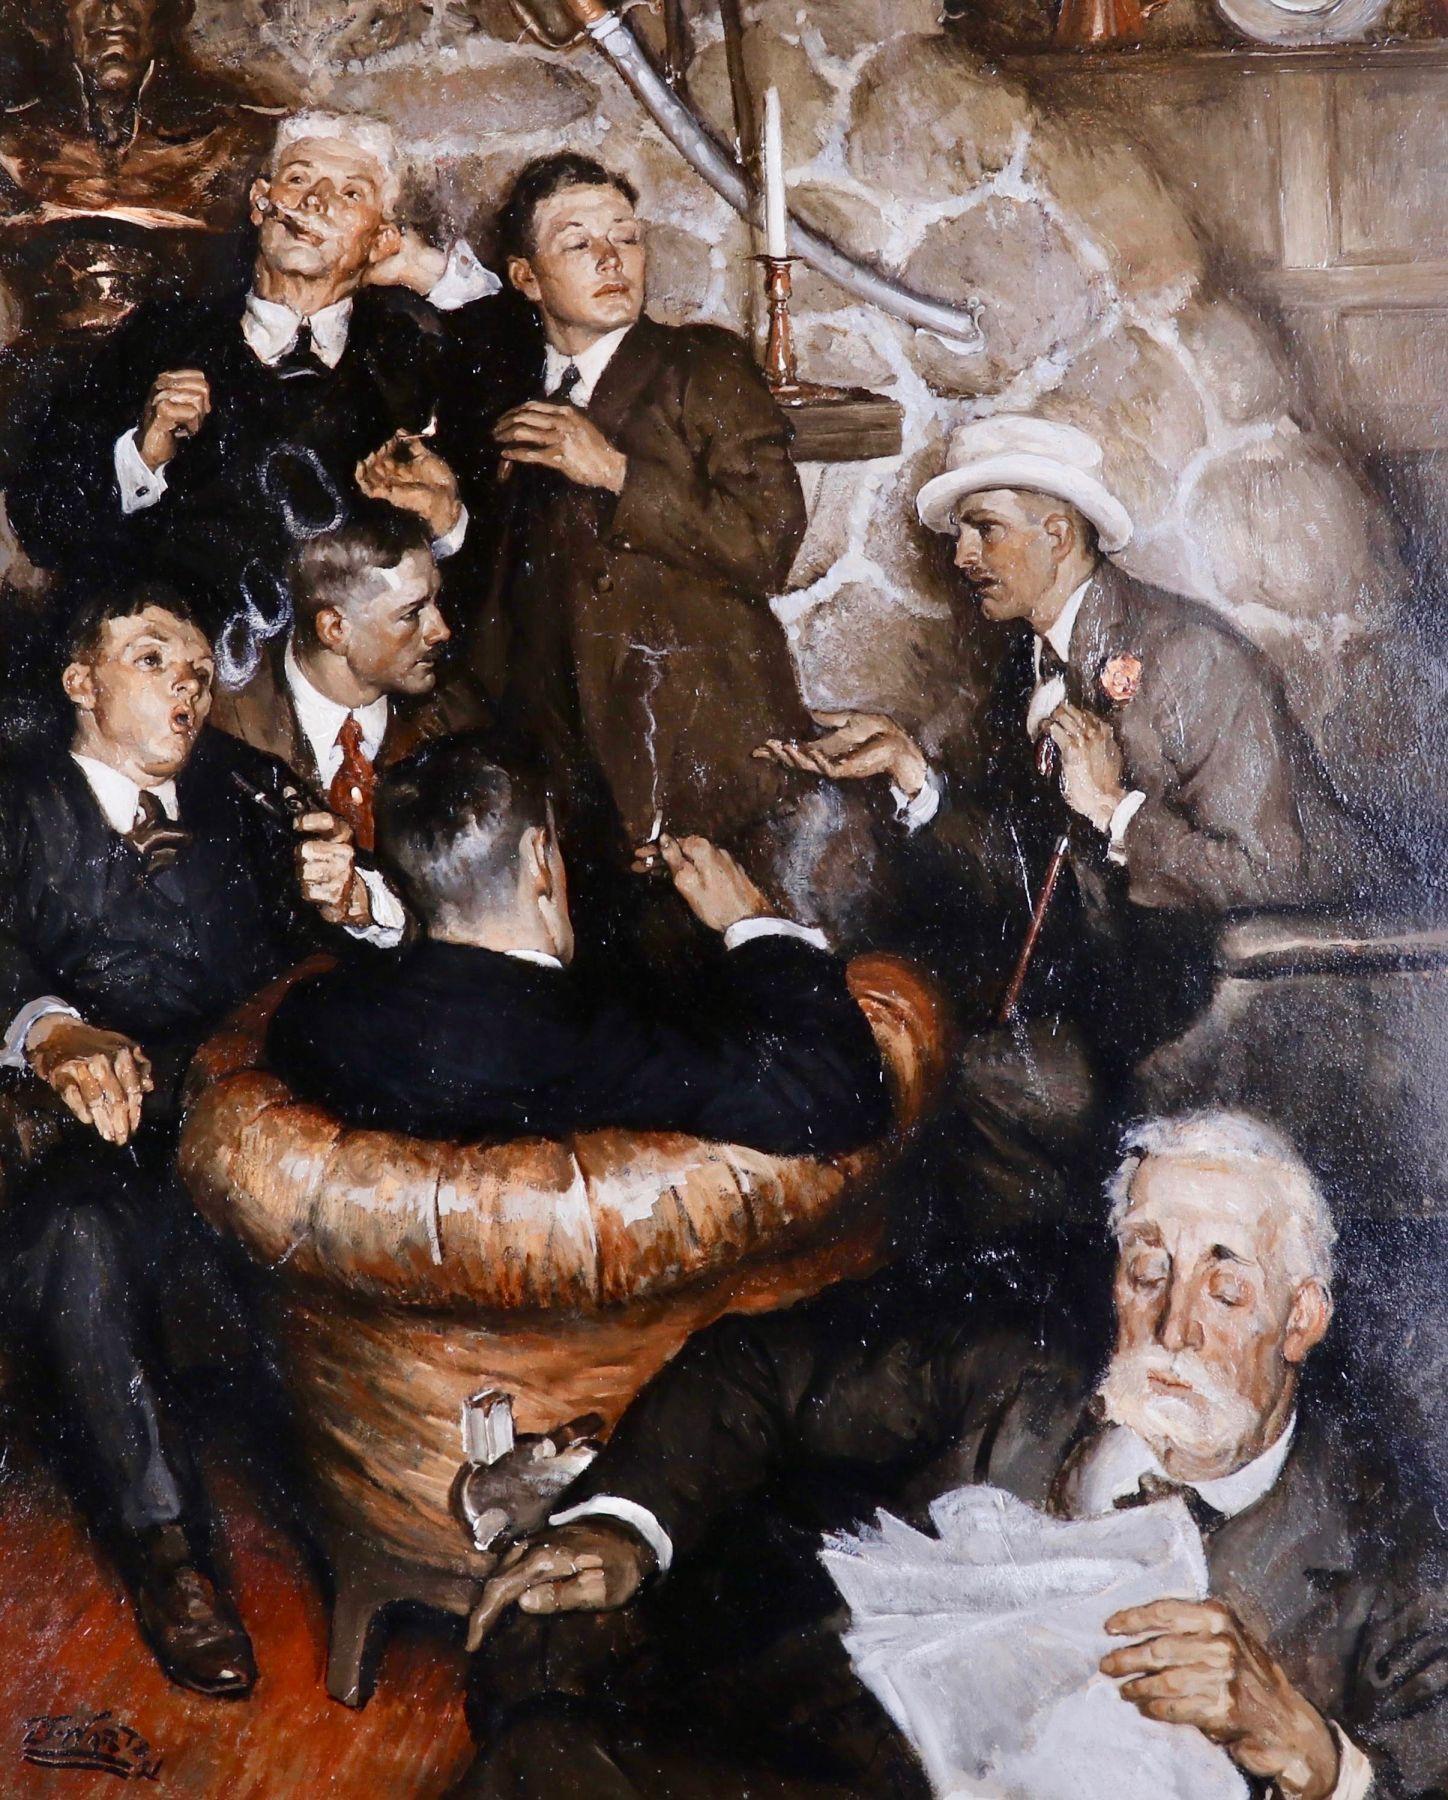 Edmund Ward Figurative Painting - Eyes of Love: Bachelor Party, Pictorial Review, October 1921